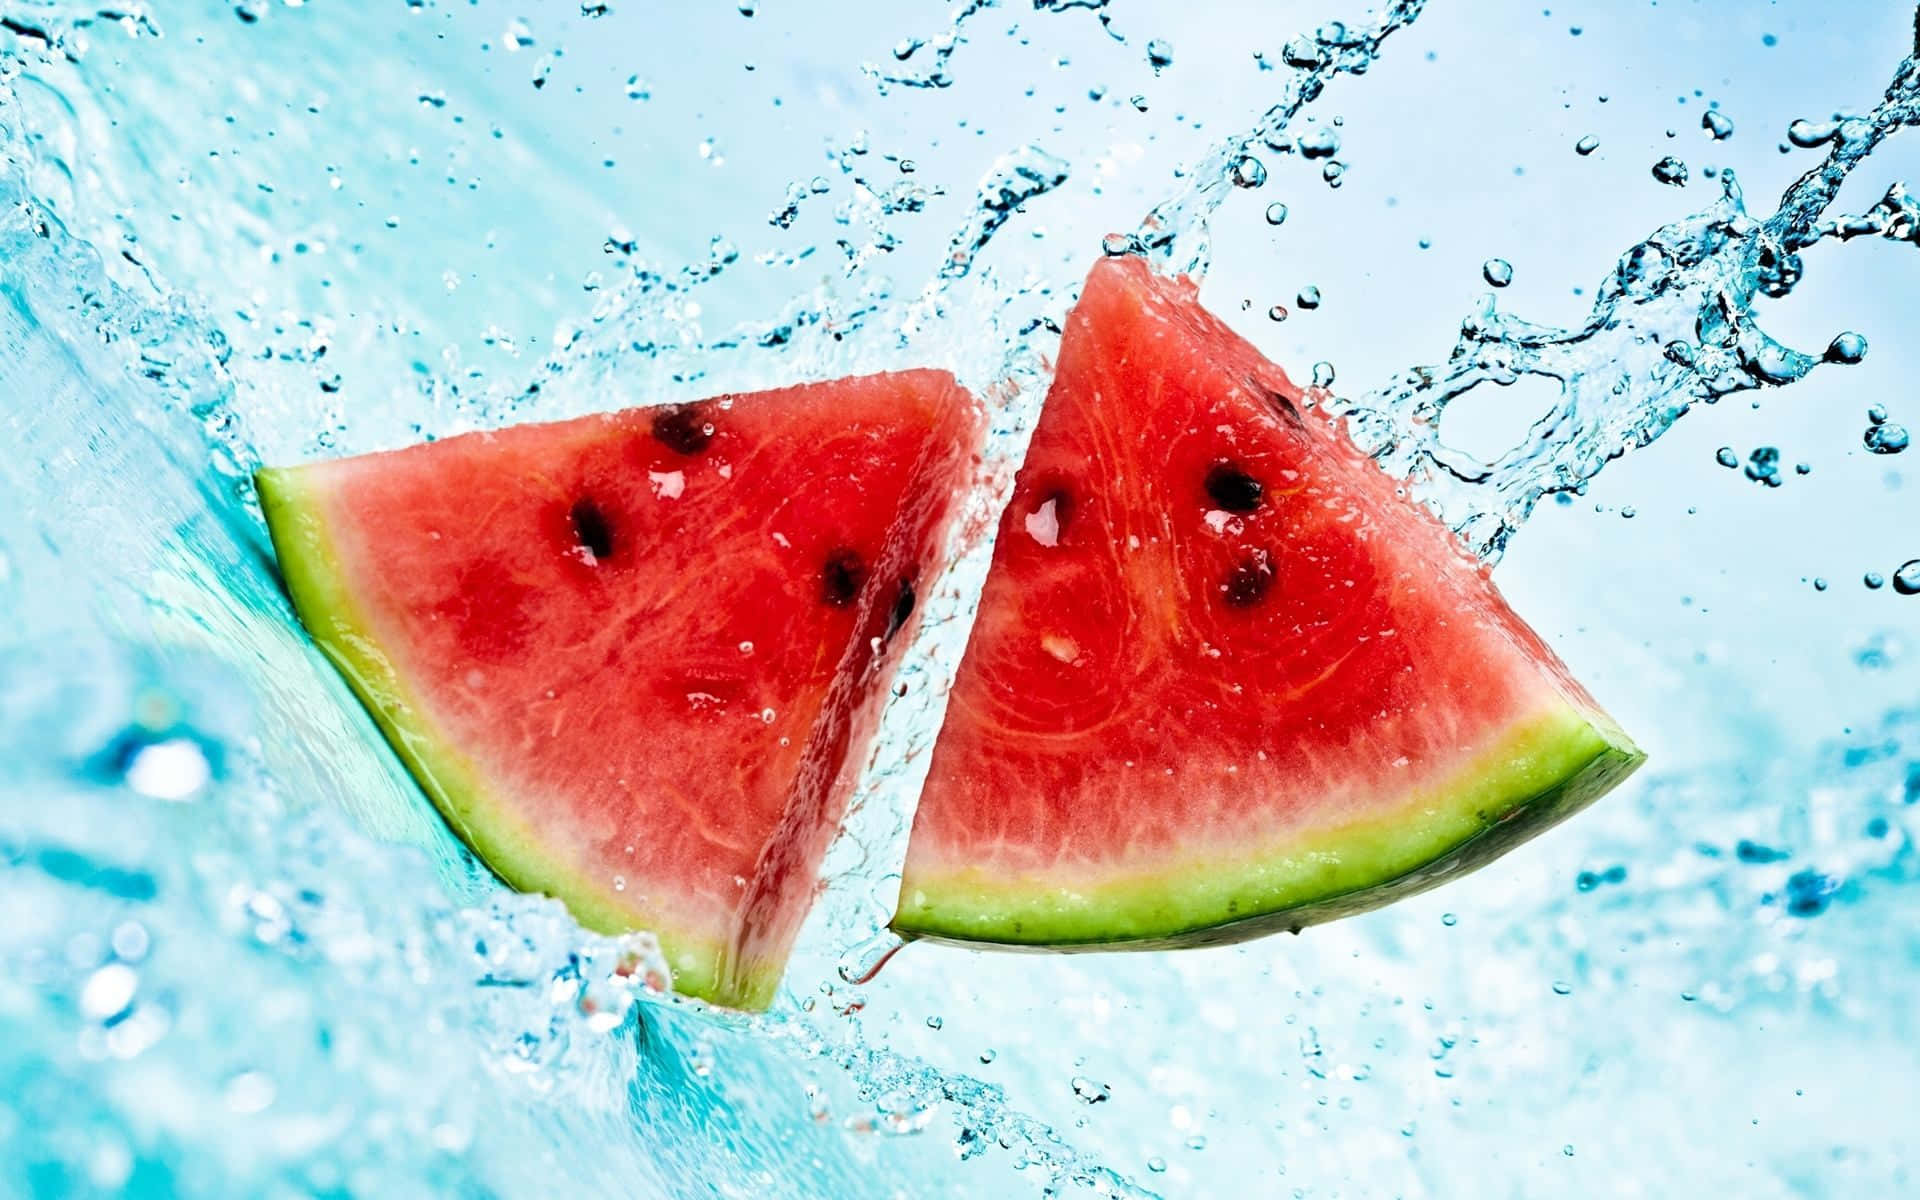 Heavenly Two Sliced Watermelons Background